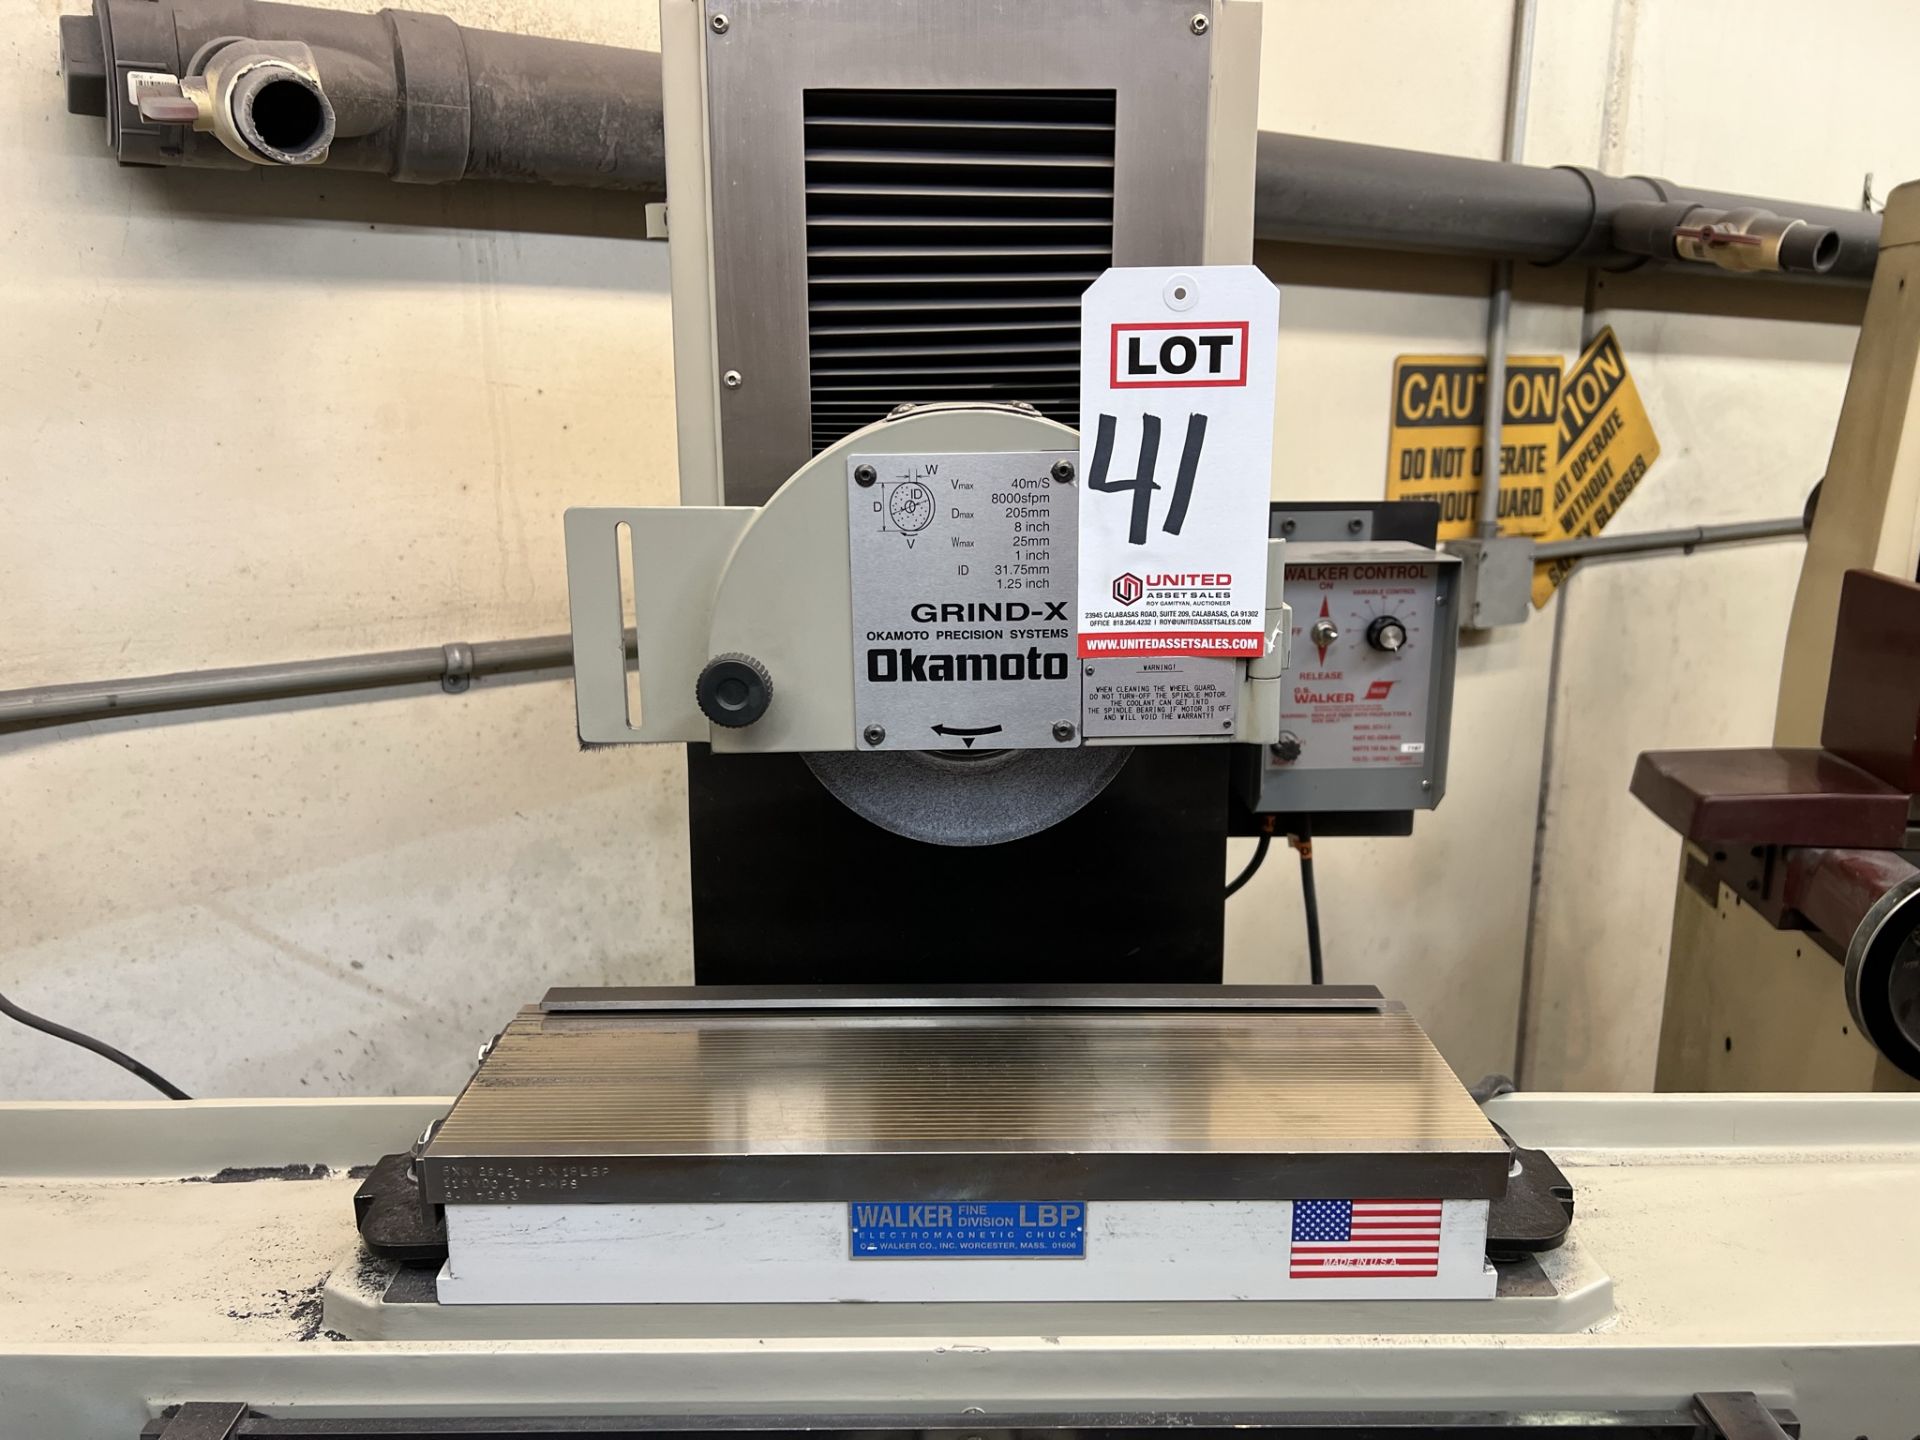 2018 OKAMOTO LINEAR 618B SURFACE GRINDER, S/N 48824, W/ WALKER 18" X 6" MAGNETIC CHUCK AND CONTROLS, - Image 5 of 15